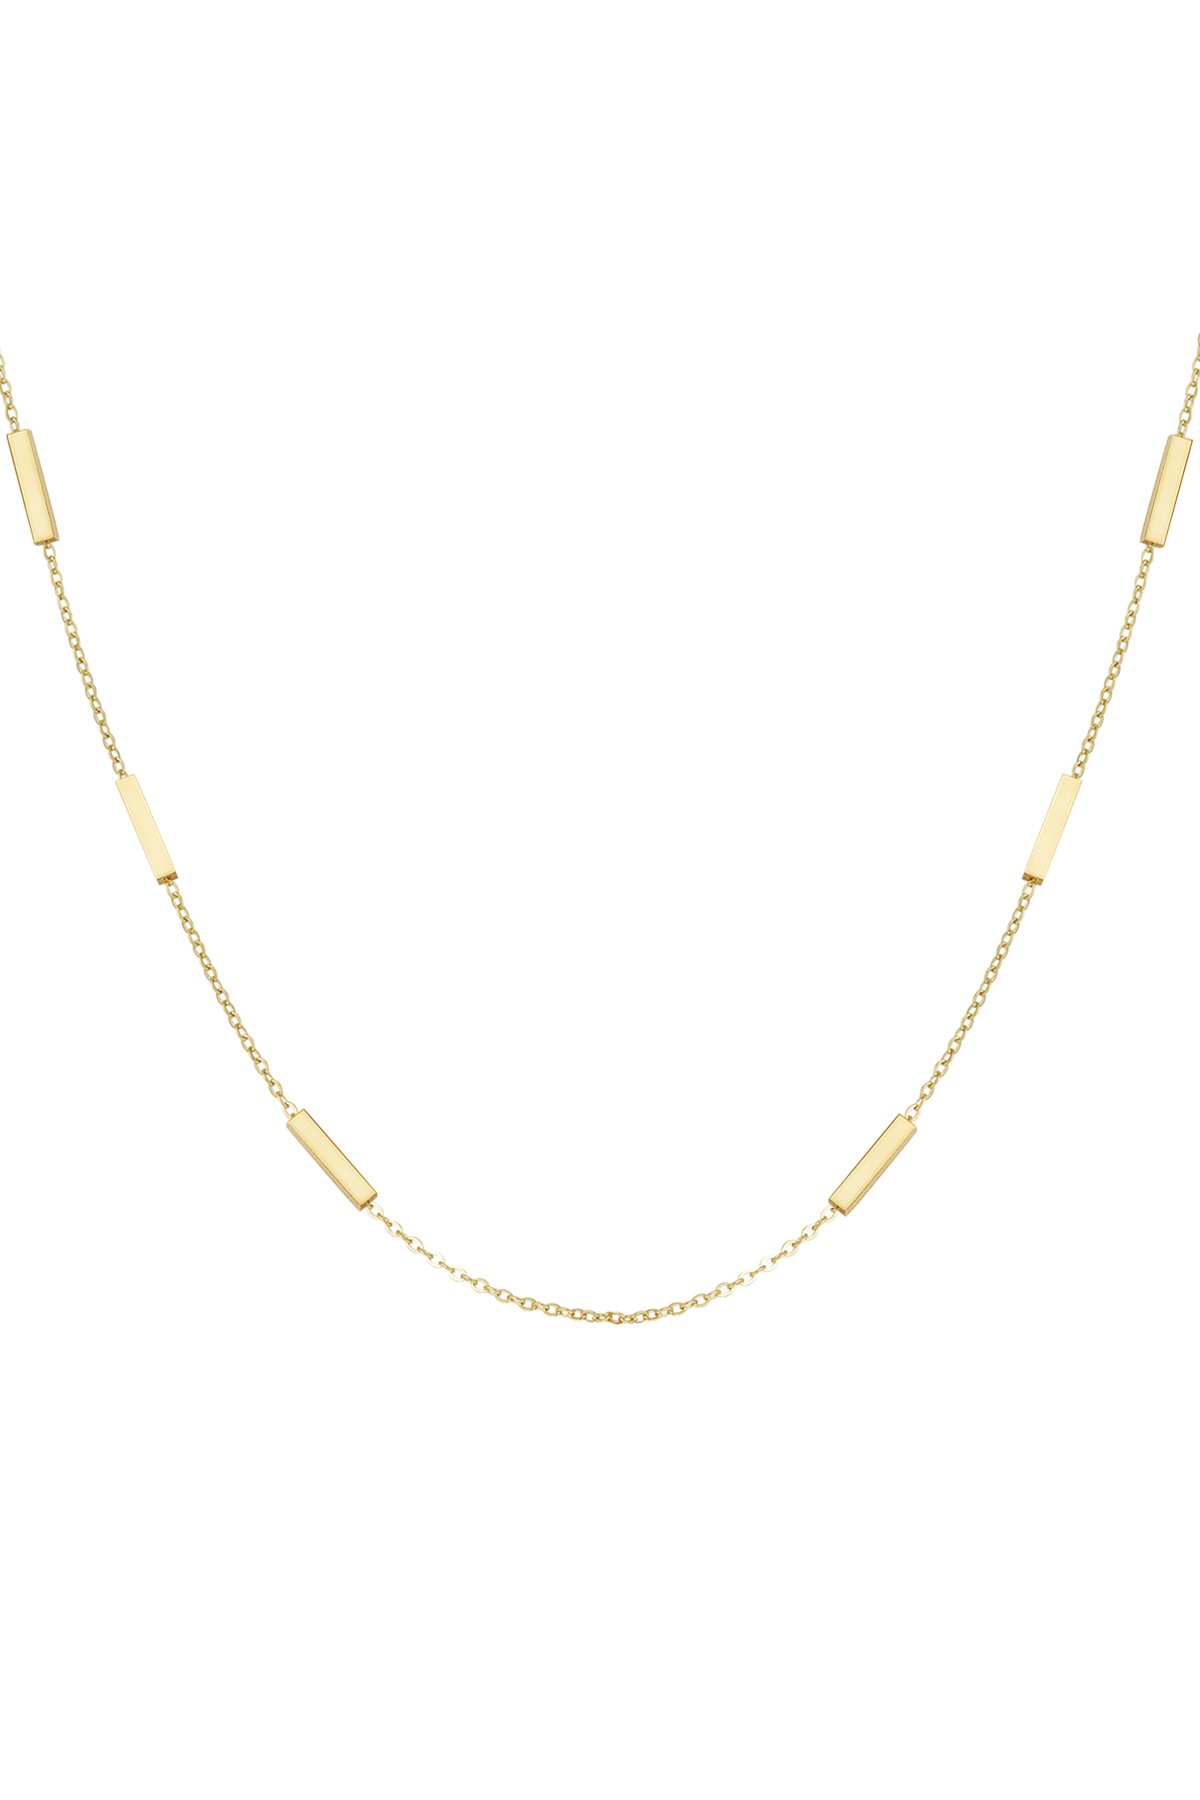 Necklace tube charms - gold 